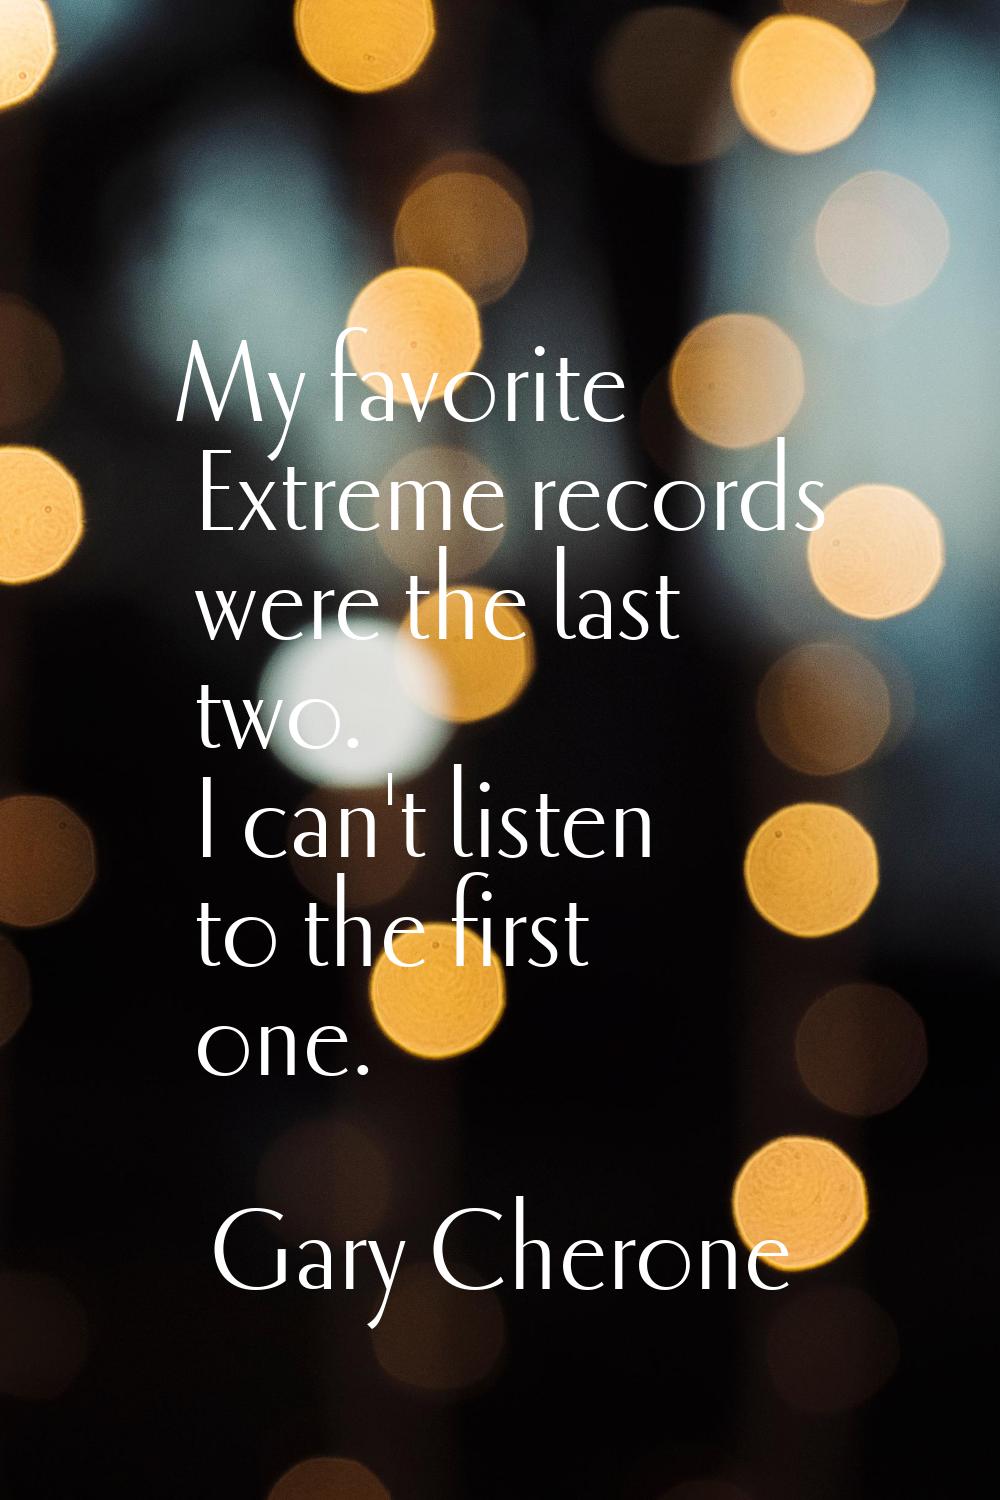 My favorite Extreme records were the last two. I can't listen to the first one.